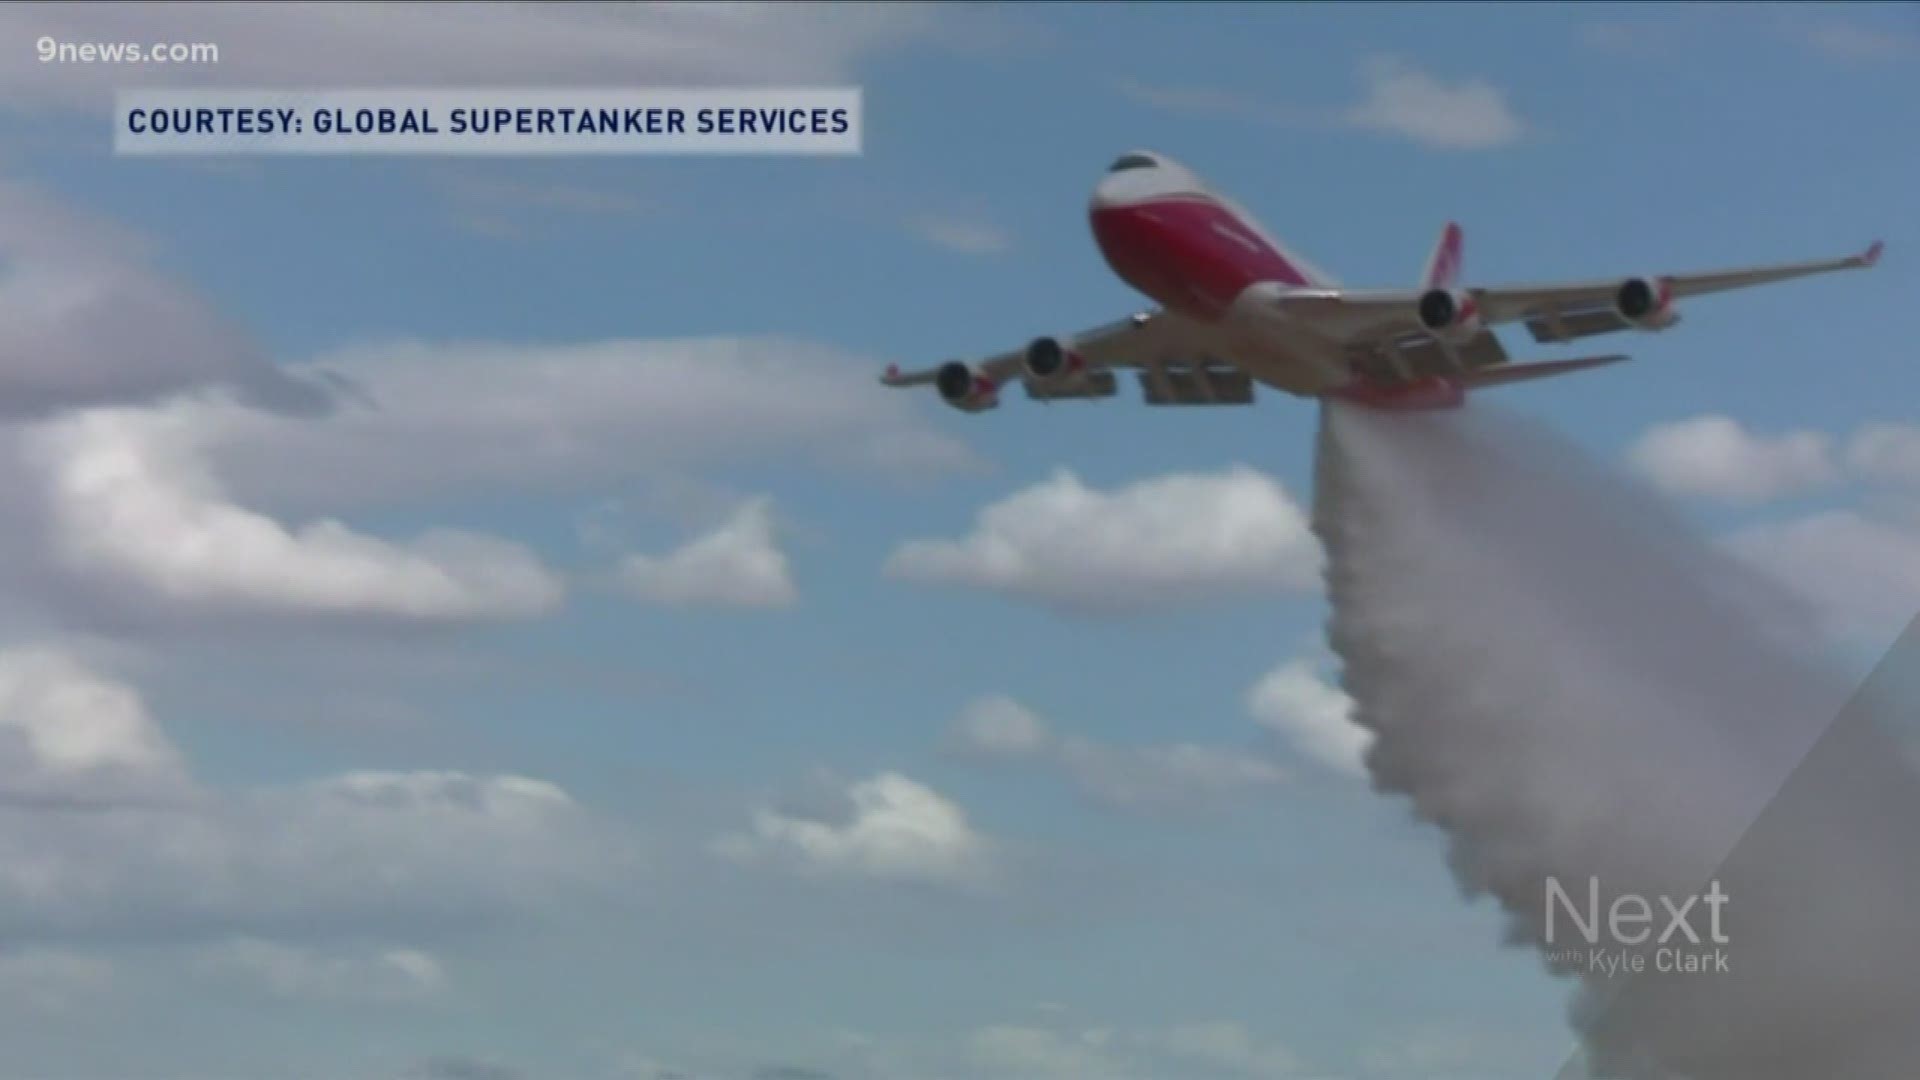 The supertanker is helping fight the fires in what's known as "Earth's lung."